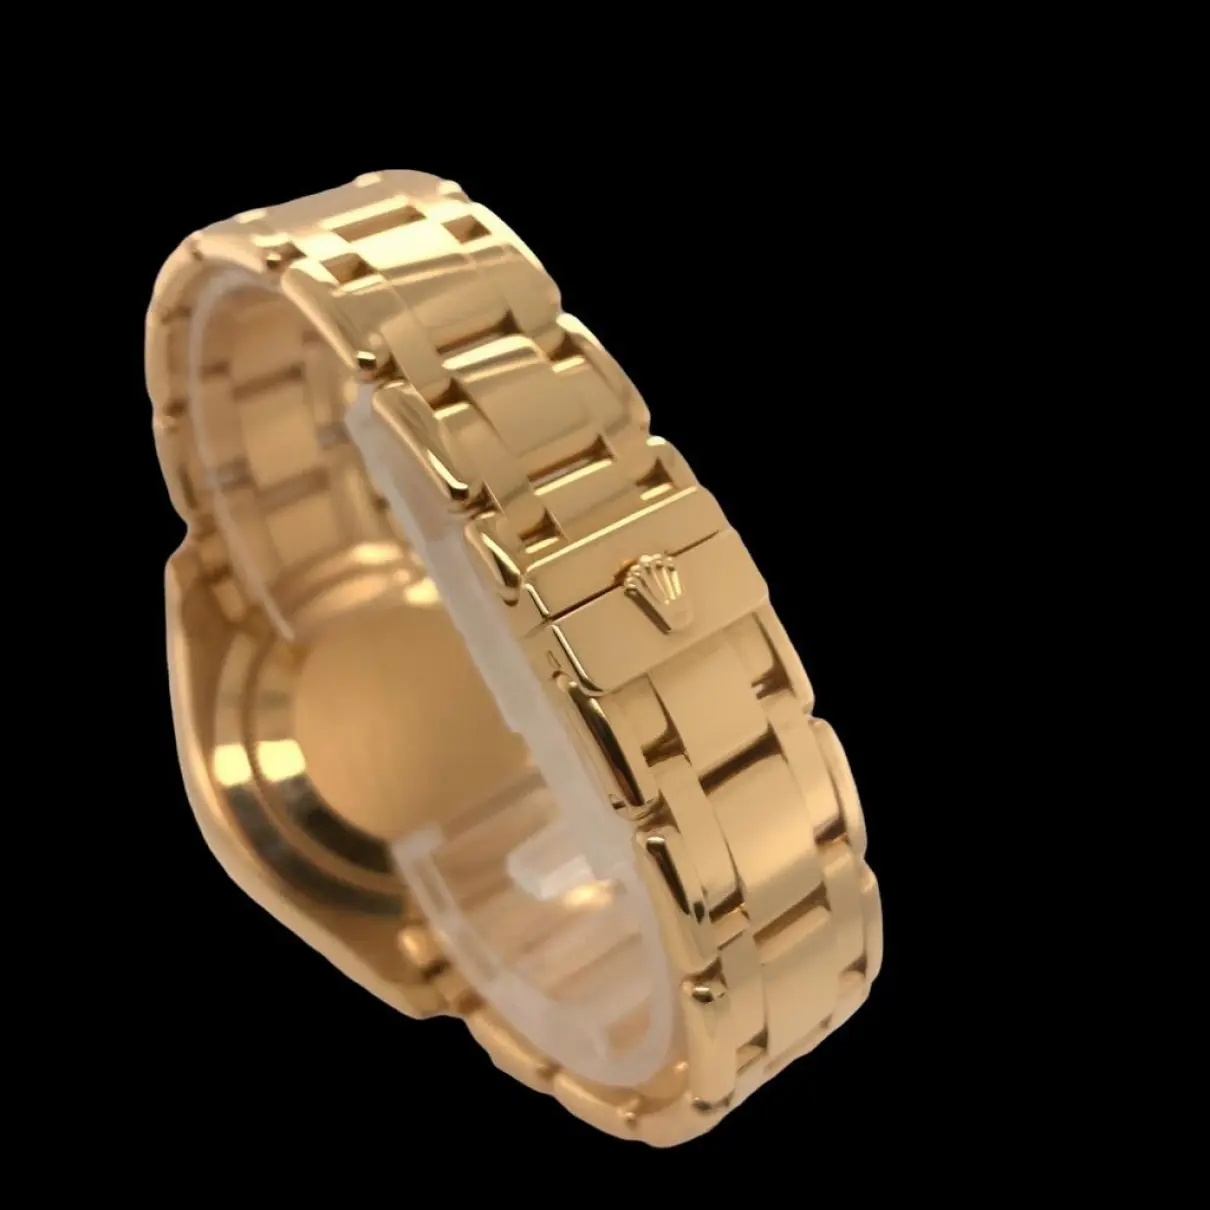 Buy Rolex Day-Date yellow gold watch online